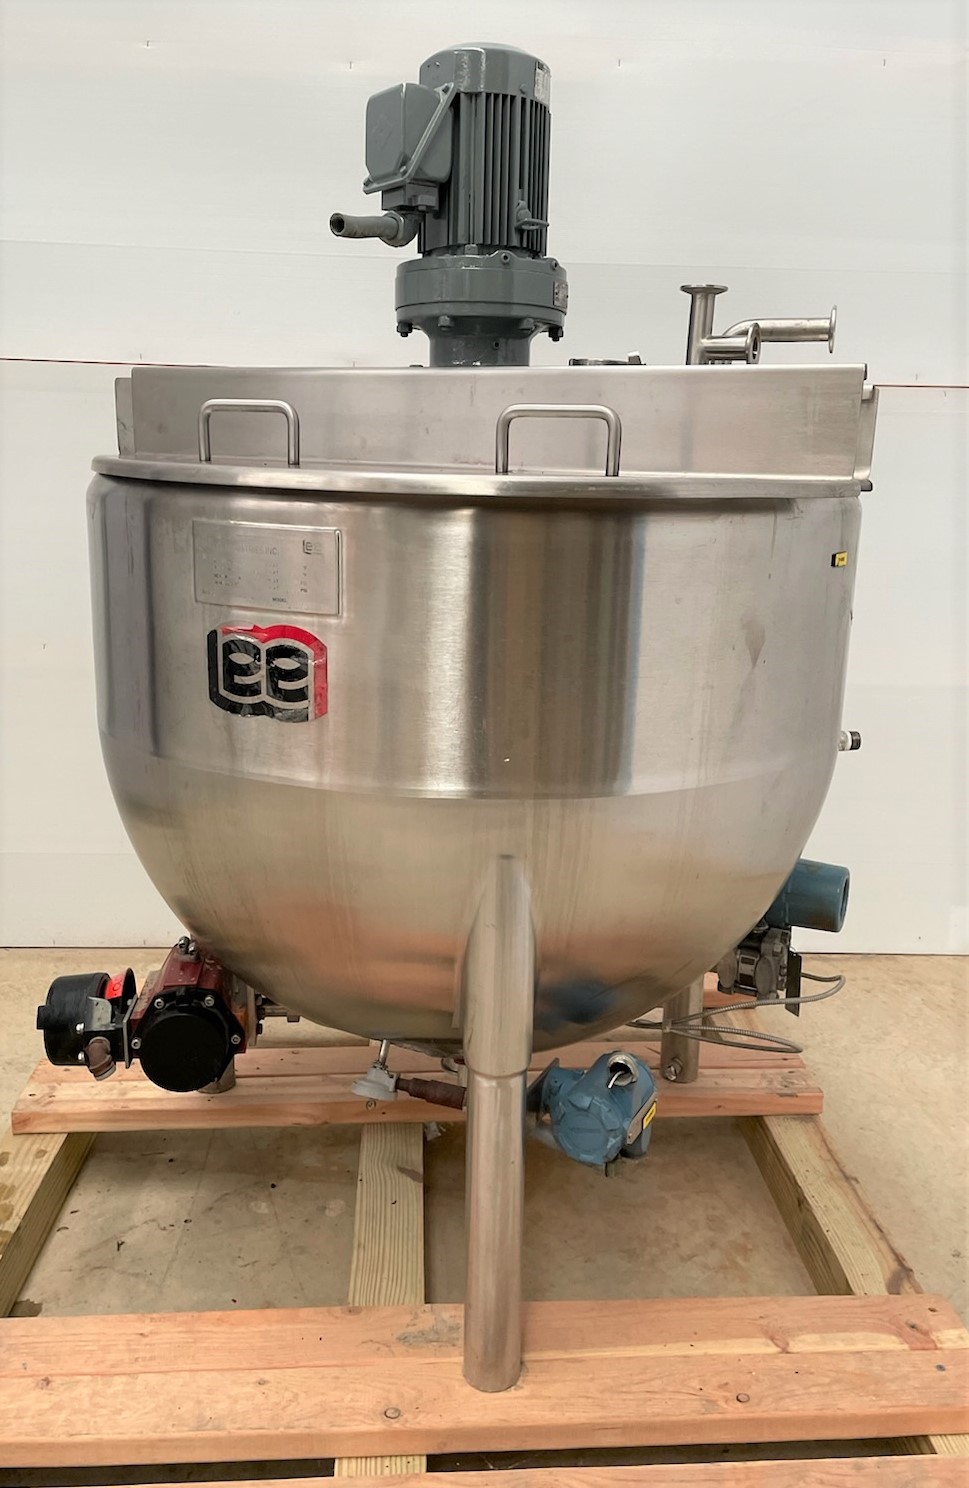 used 60 Gallon LEE Stainless Steel Jacketed with Scrape Surface agitation Kettle, Single Motion Agitator with Scraper Blades. Model 60D7S. Jacket rated 150 PSI @ 366 Deg.F. Has actuated bottom outlet valve and instrumentation including Temperature transmitter. Video of unit running available.